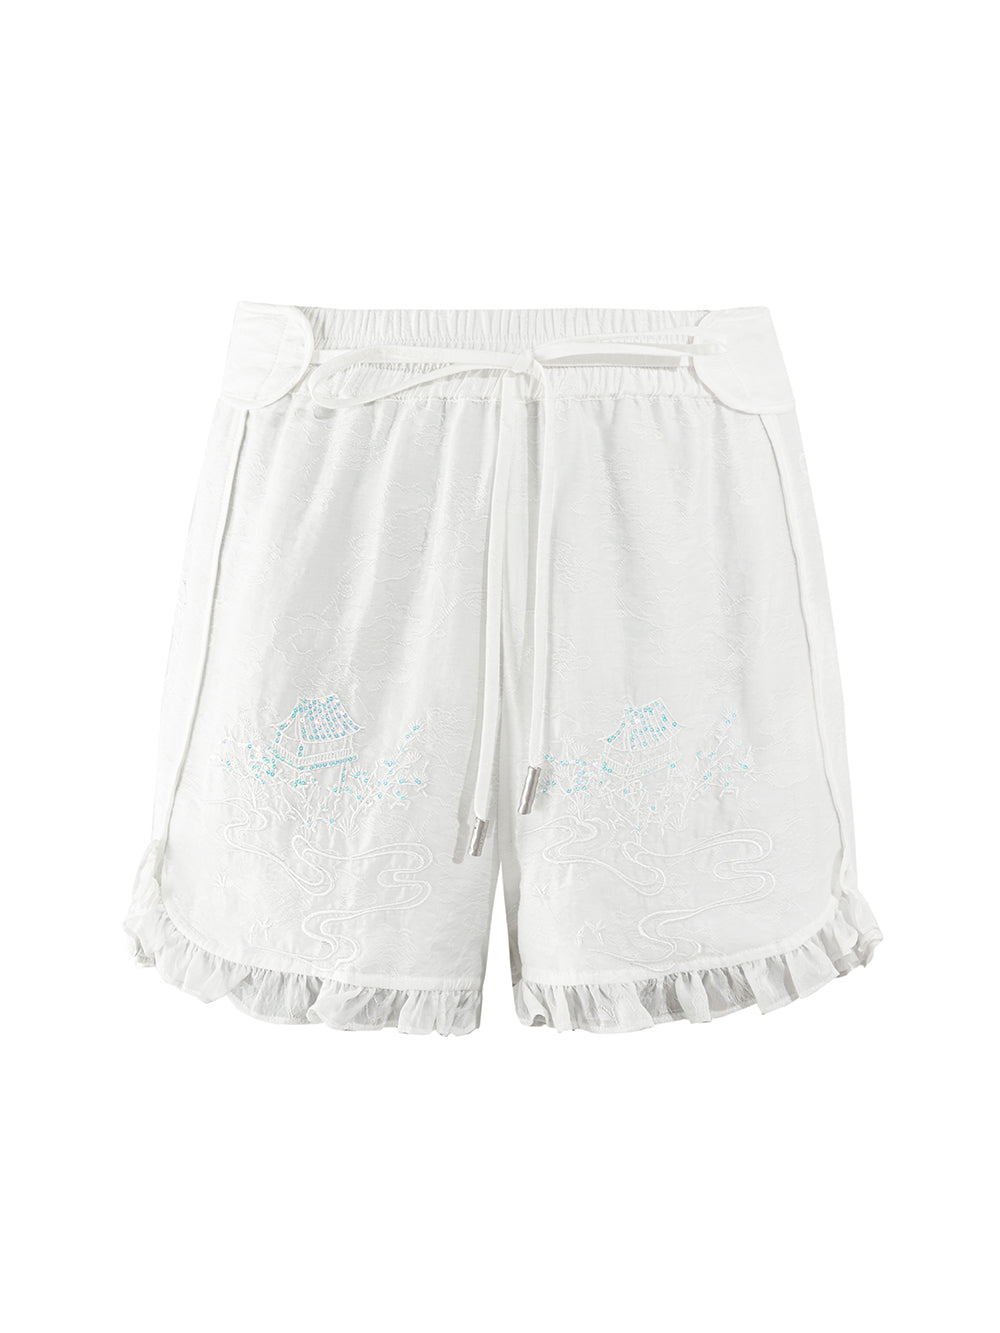 MUKZIN All-match Crisp Comfortable Loose-fitting High-quality Shorts